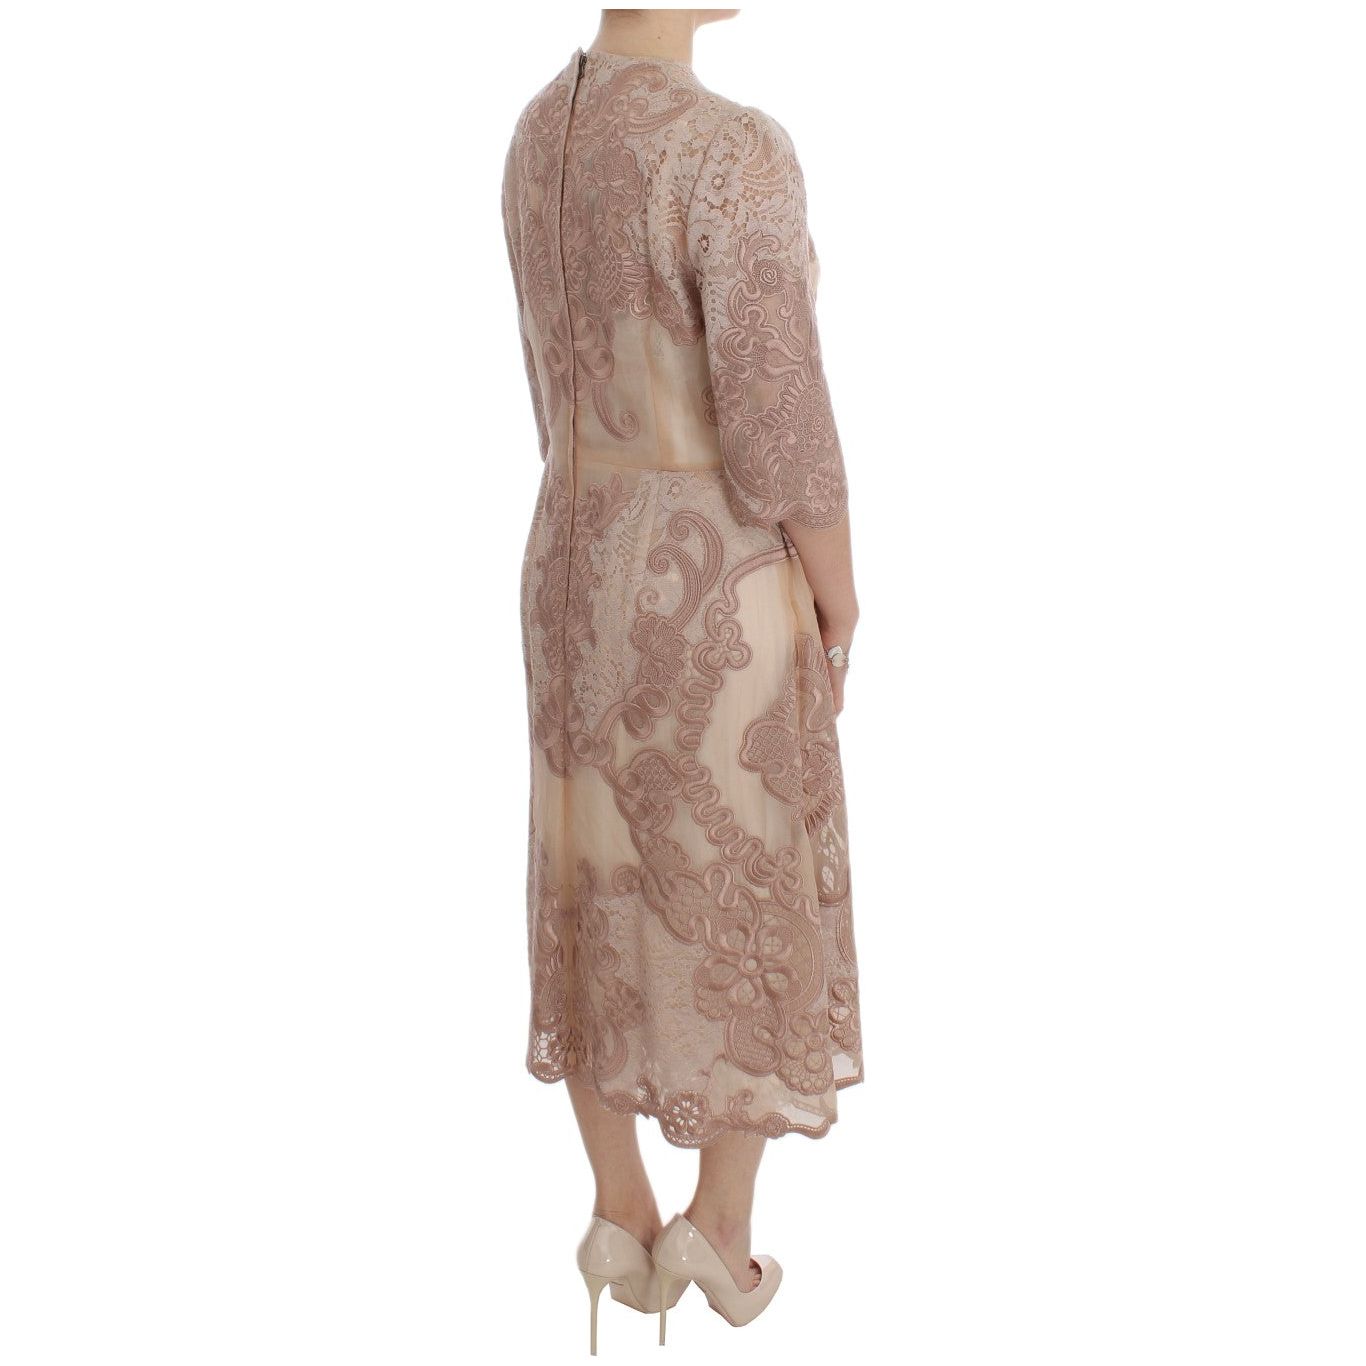 Dolce & Gabbana Elegant Pink Lace Embroidered Shift Dress pink-silk-lace-ricamo-shift-gown-dress